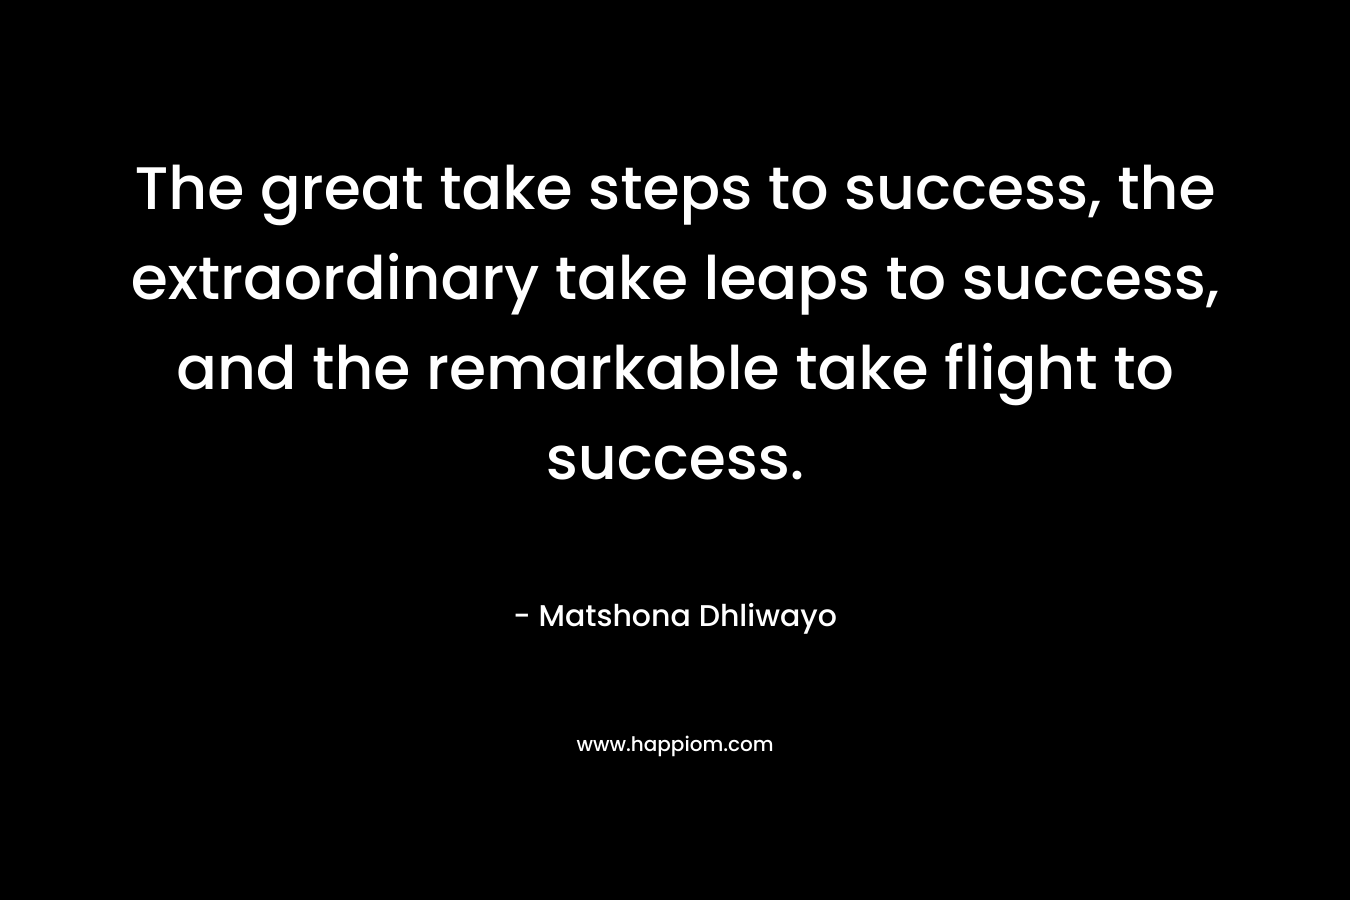 The great take steps to success, the extraordinary take leaps to success, and the remarkable take flight to success. – Matshona Dhliwayo